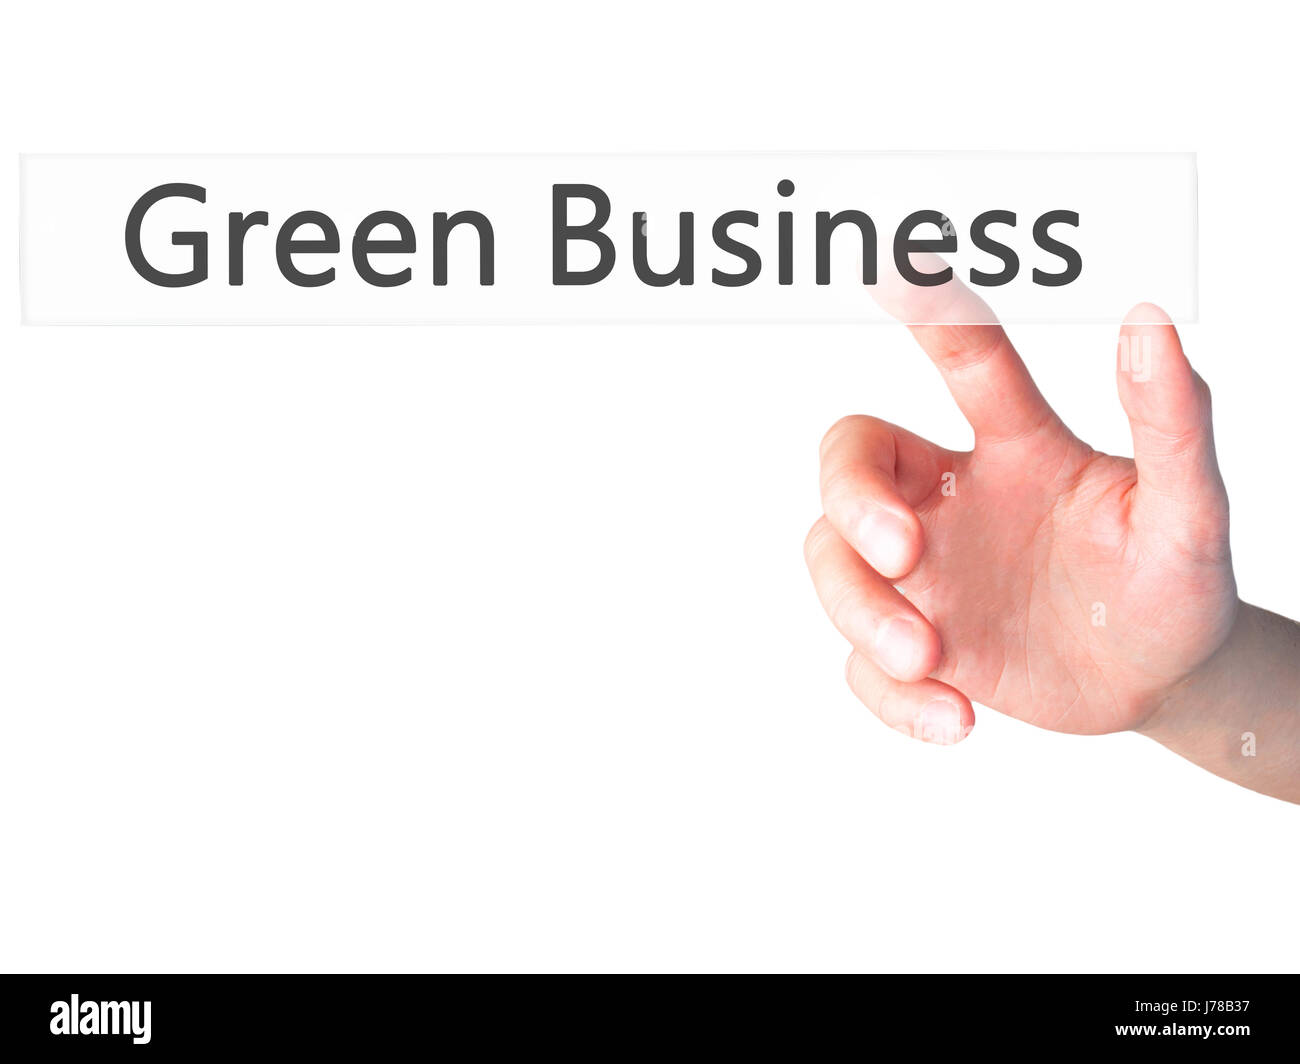 Green Business  - Hand pressing a button on blurred background concept . Business, technology, internet concept. Stock Photo Stock Photo